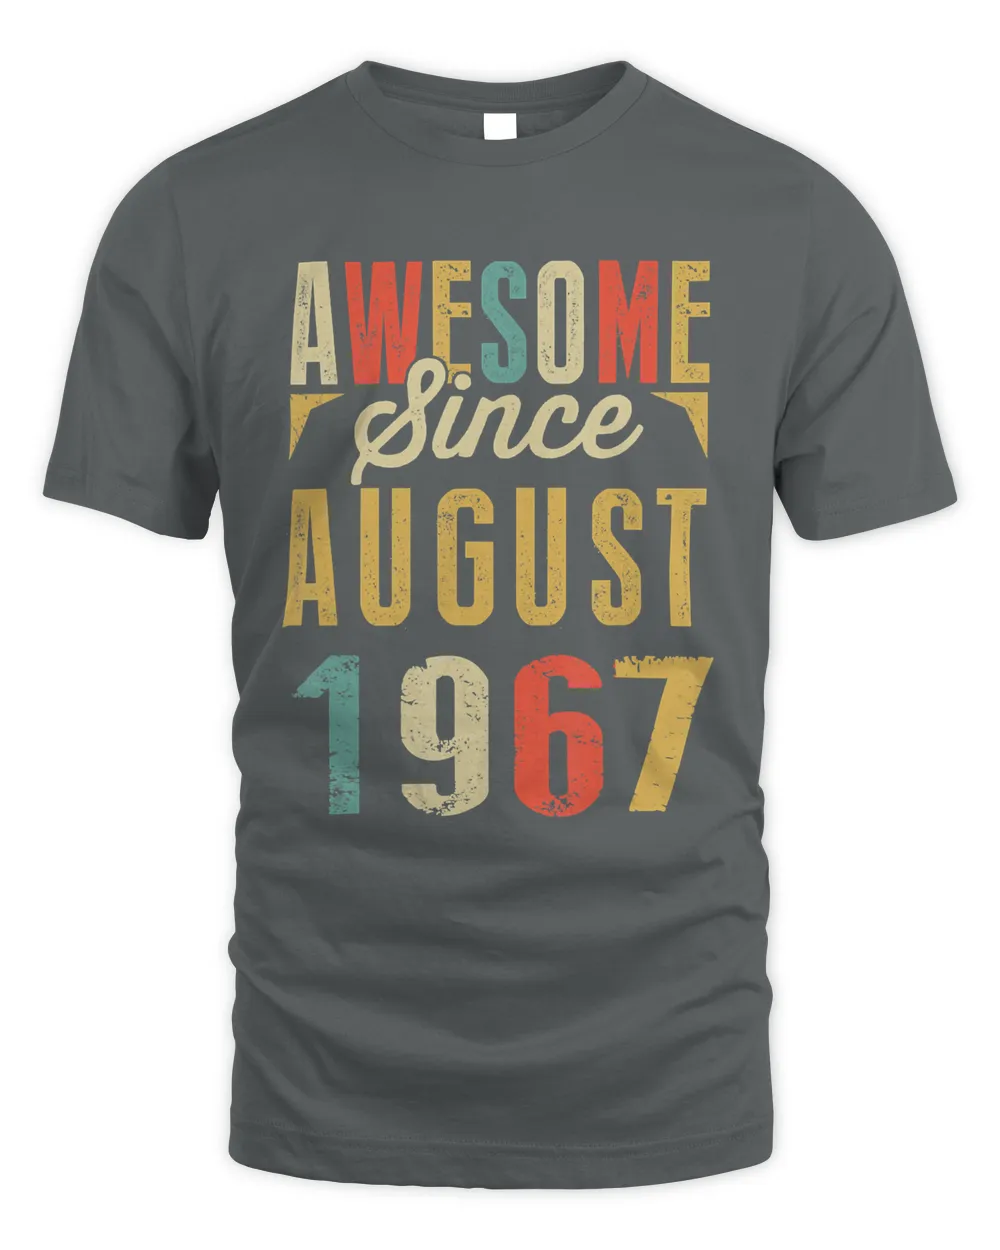 Retro Vintage Awesome Since AUGUST 1967 Birthday T-Shirt